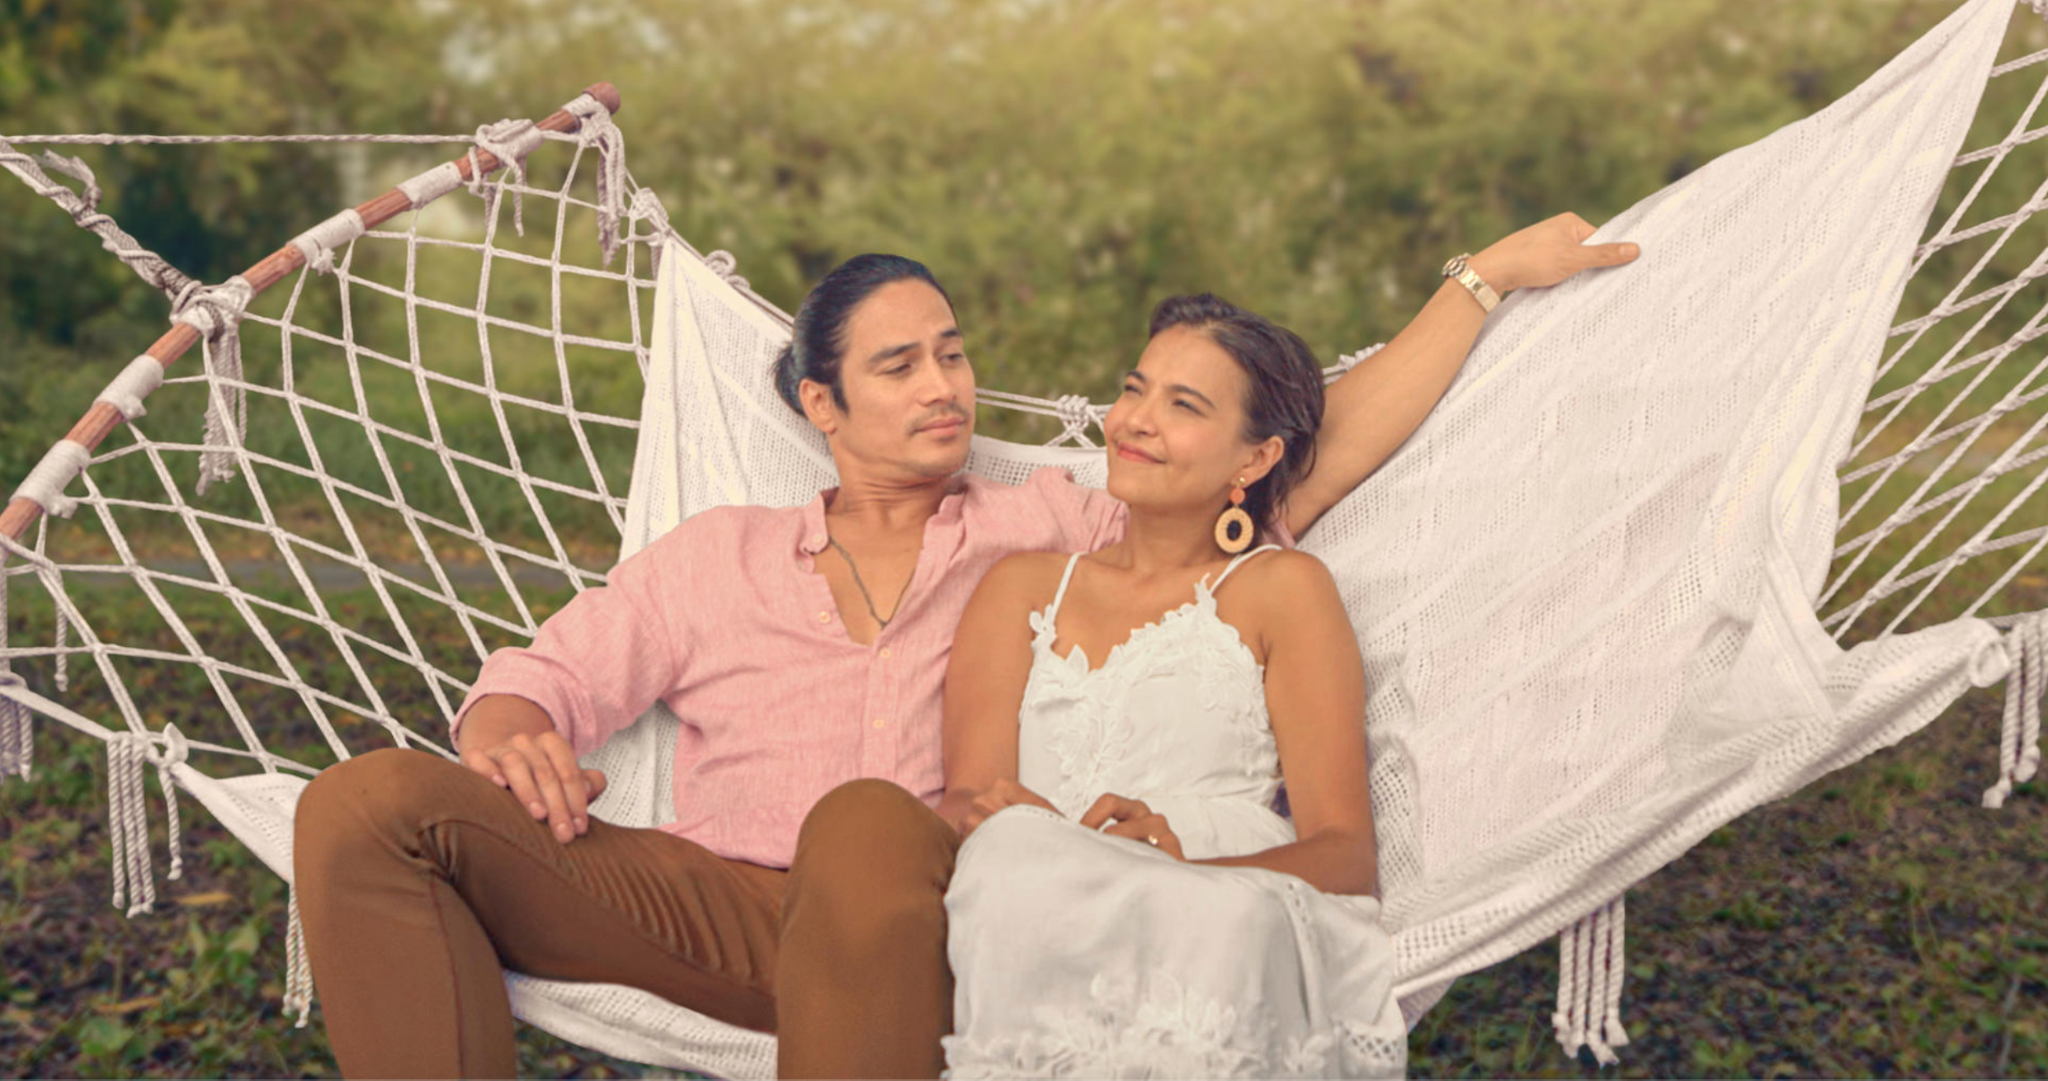 MY AMANDA Starring Piolo Pascual and Alessandra de Rossi Launches on Netflix on July 15, 2021